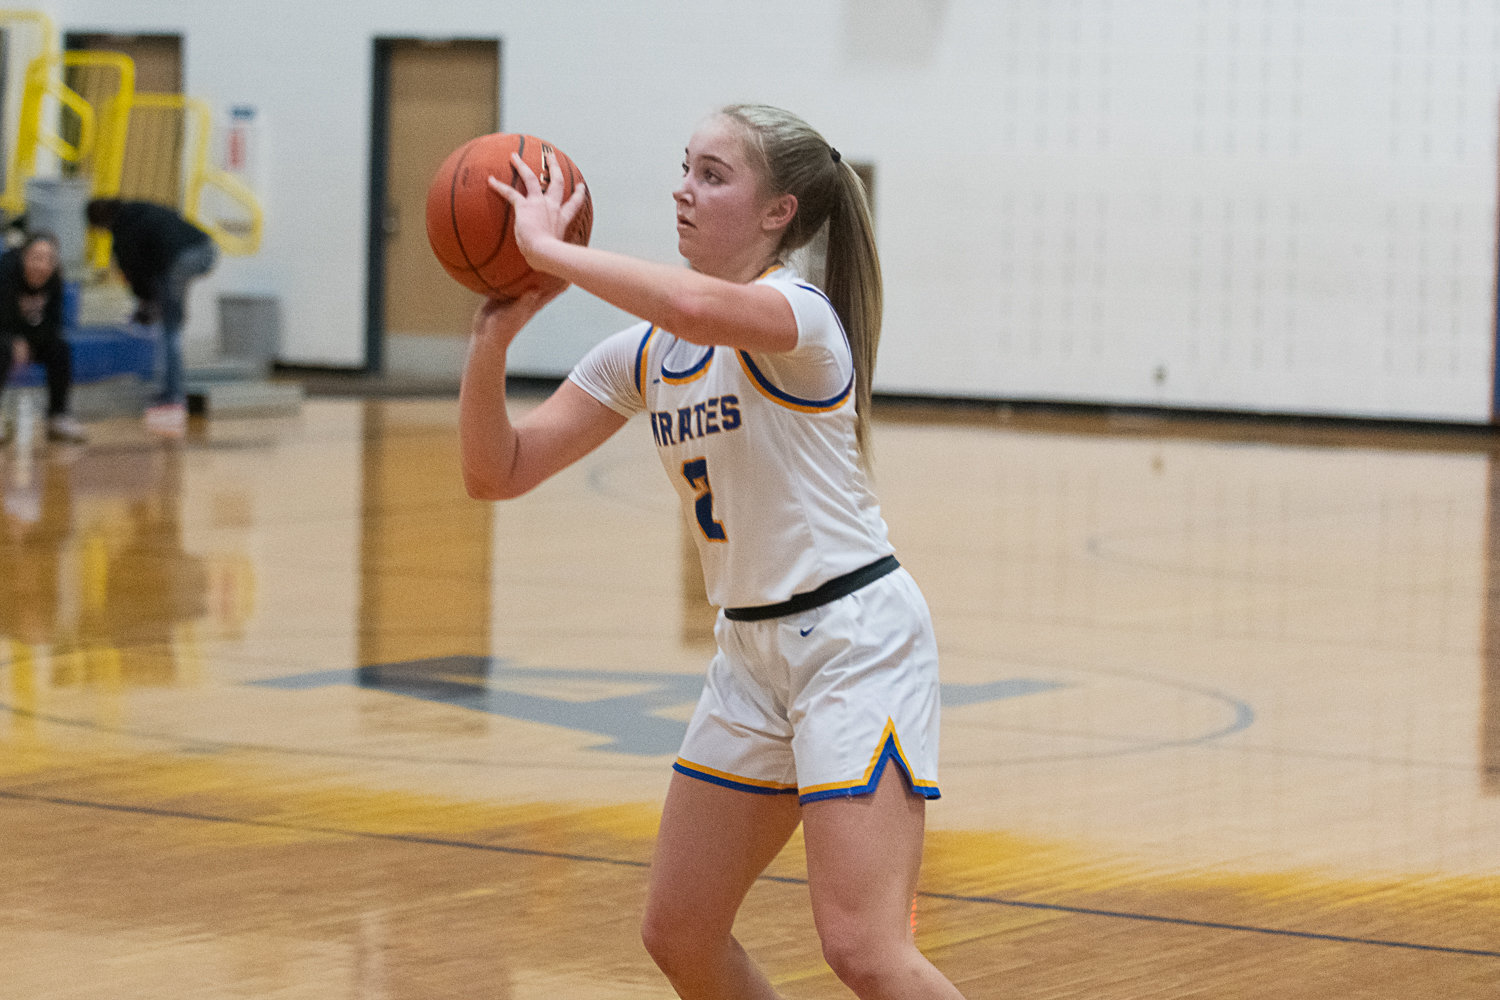 Danika Hallom lines up a 3-pointer during the second half of Adna's 51-47 win over Rainier on Jan. 19.